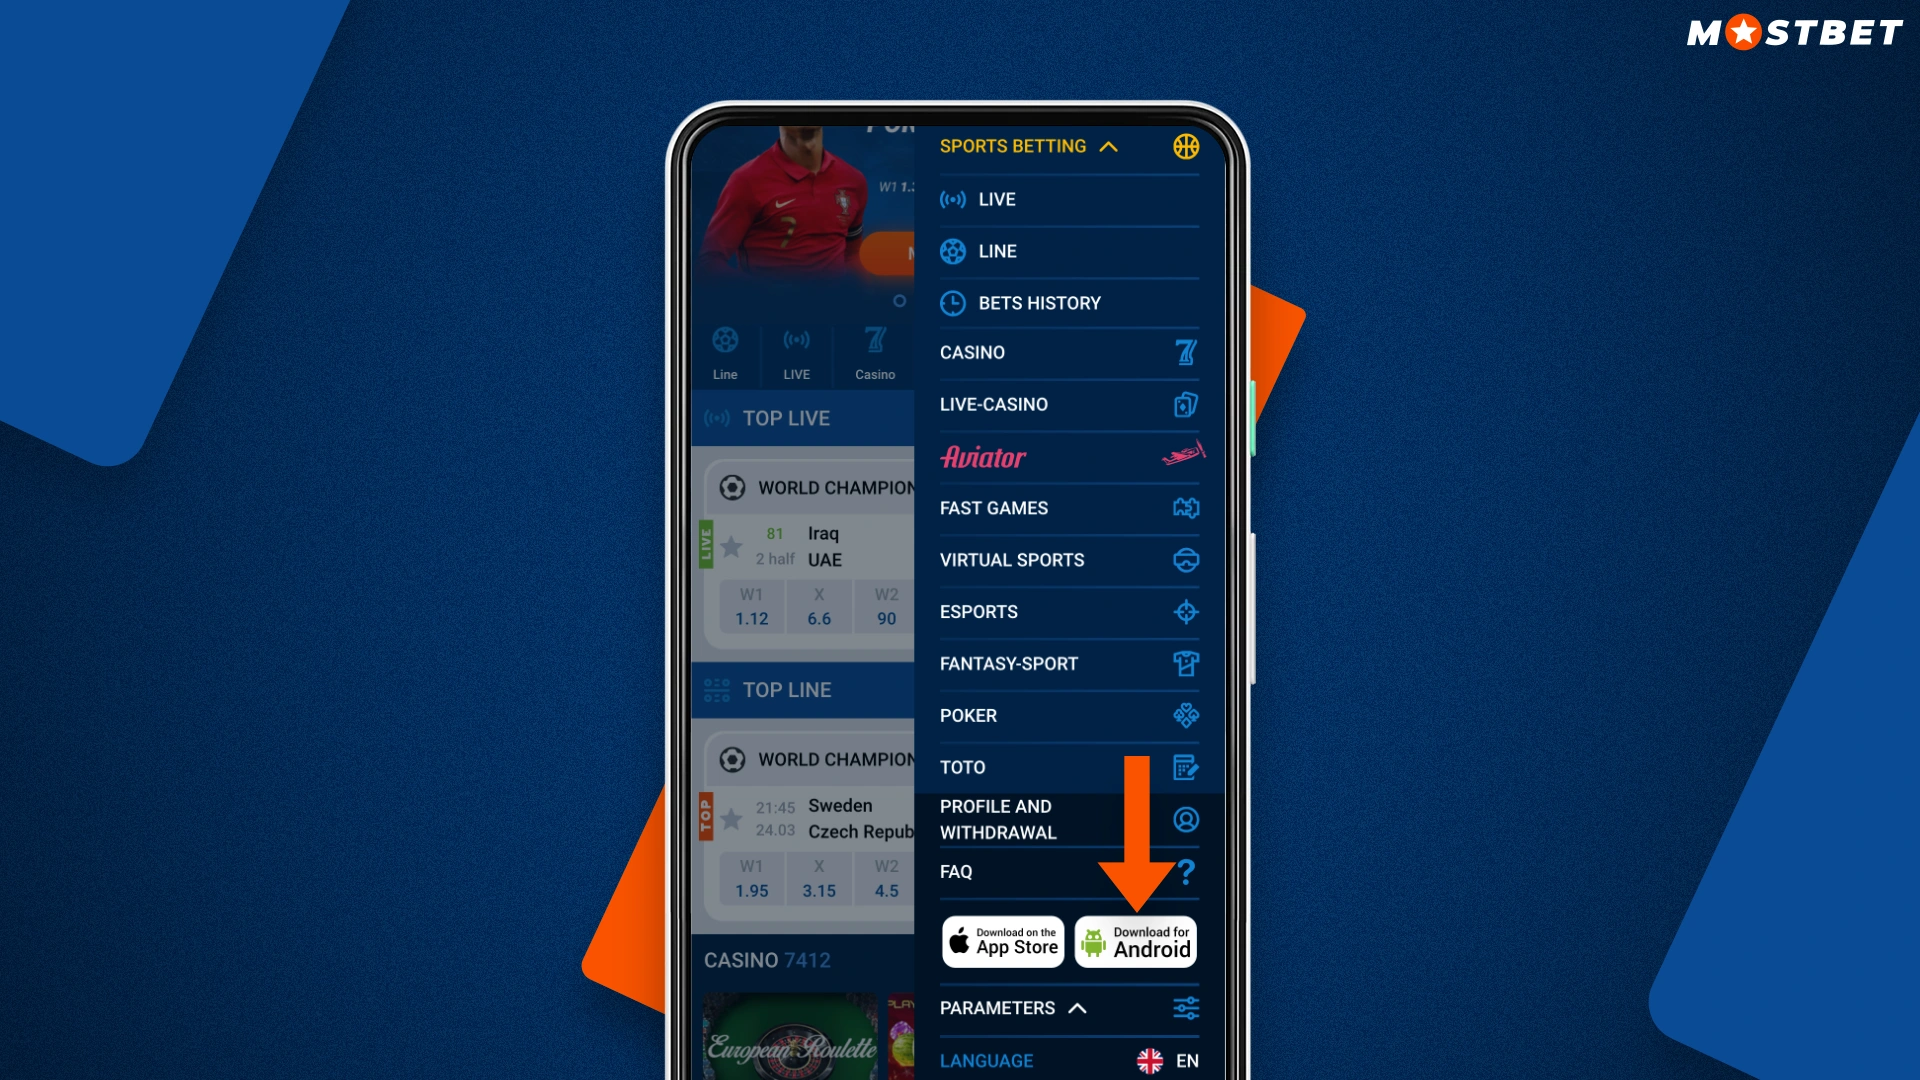 main menu of the mobile version of mostbet